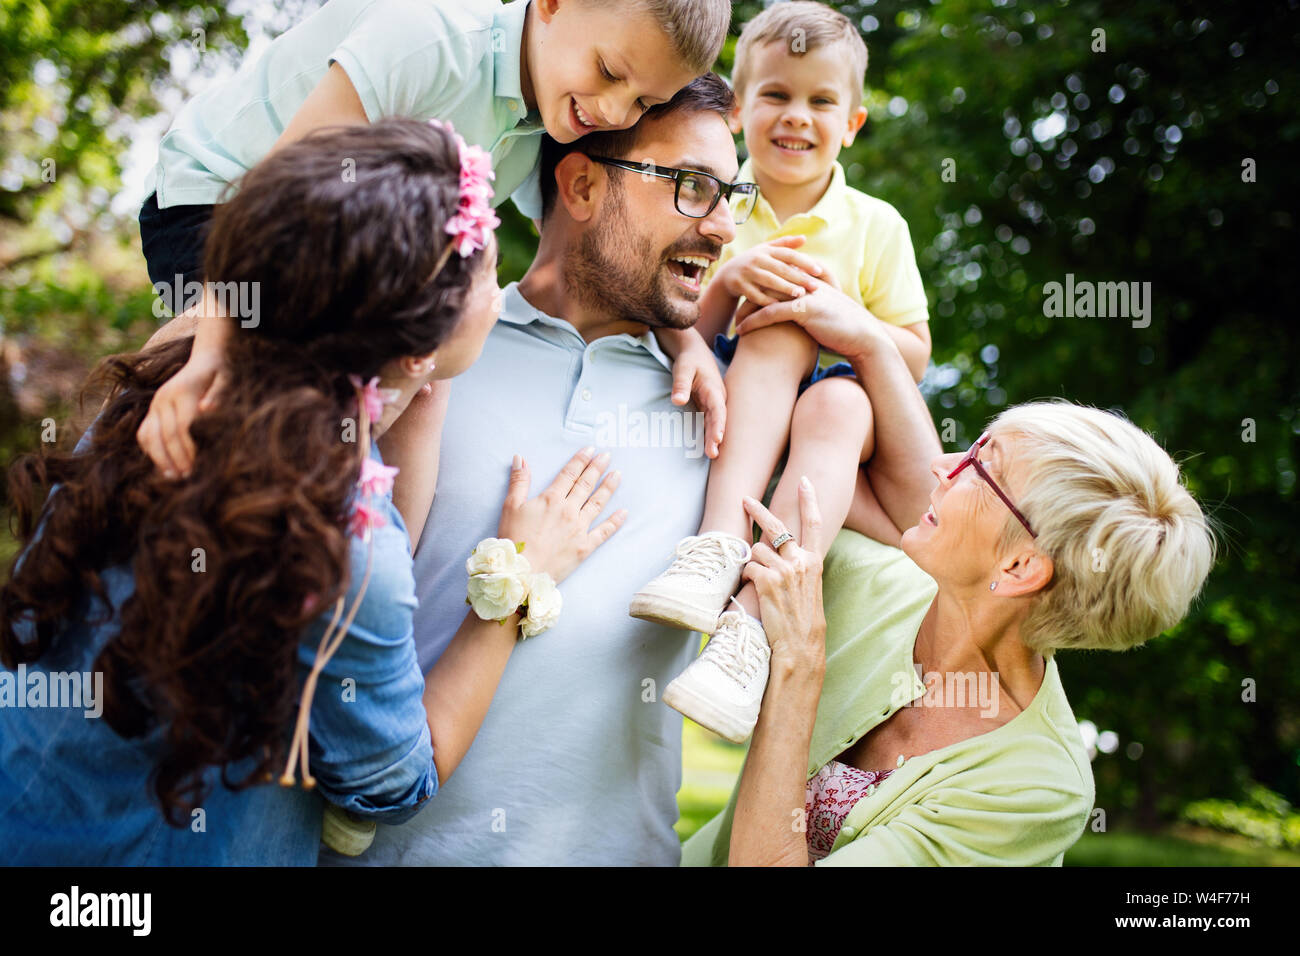 Happy young family playing on the grass in the park and enjoying picnic Stock Photo